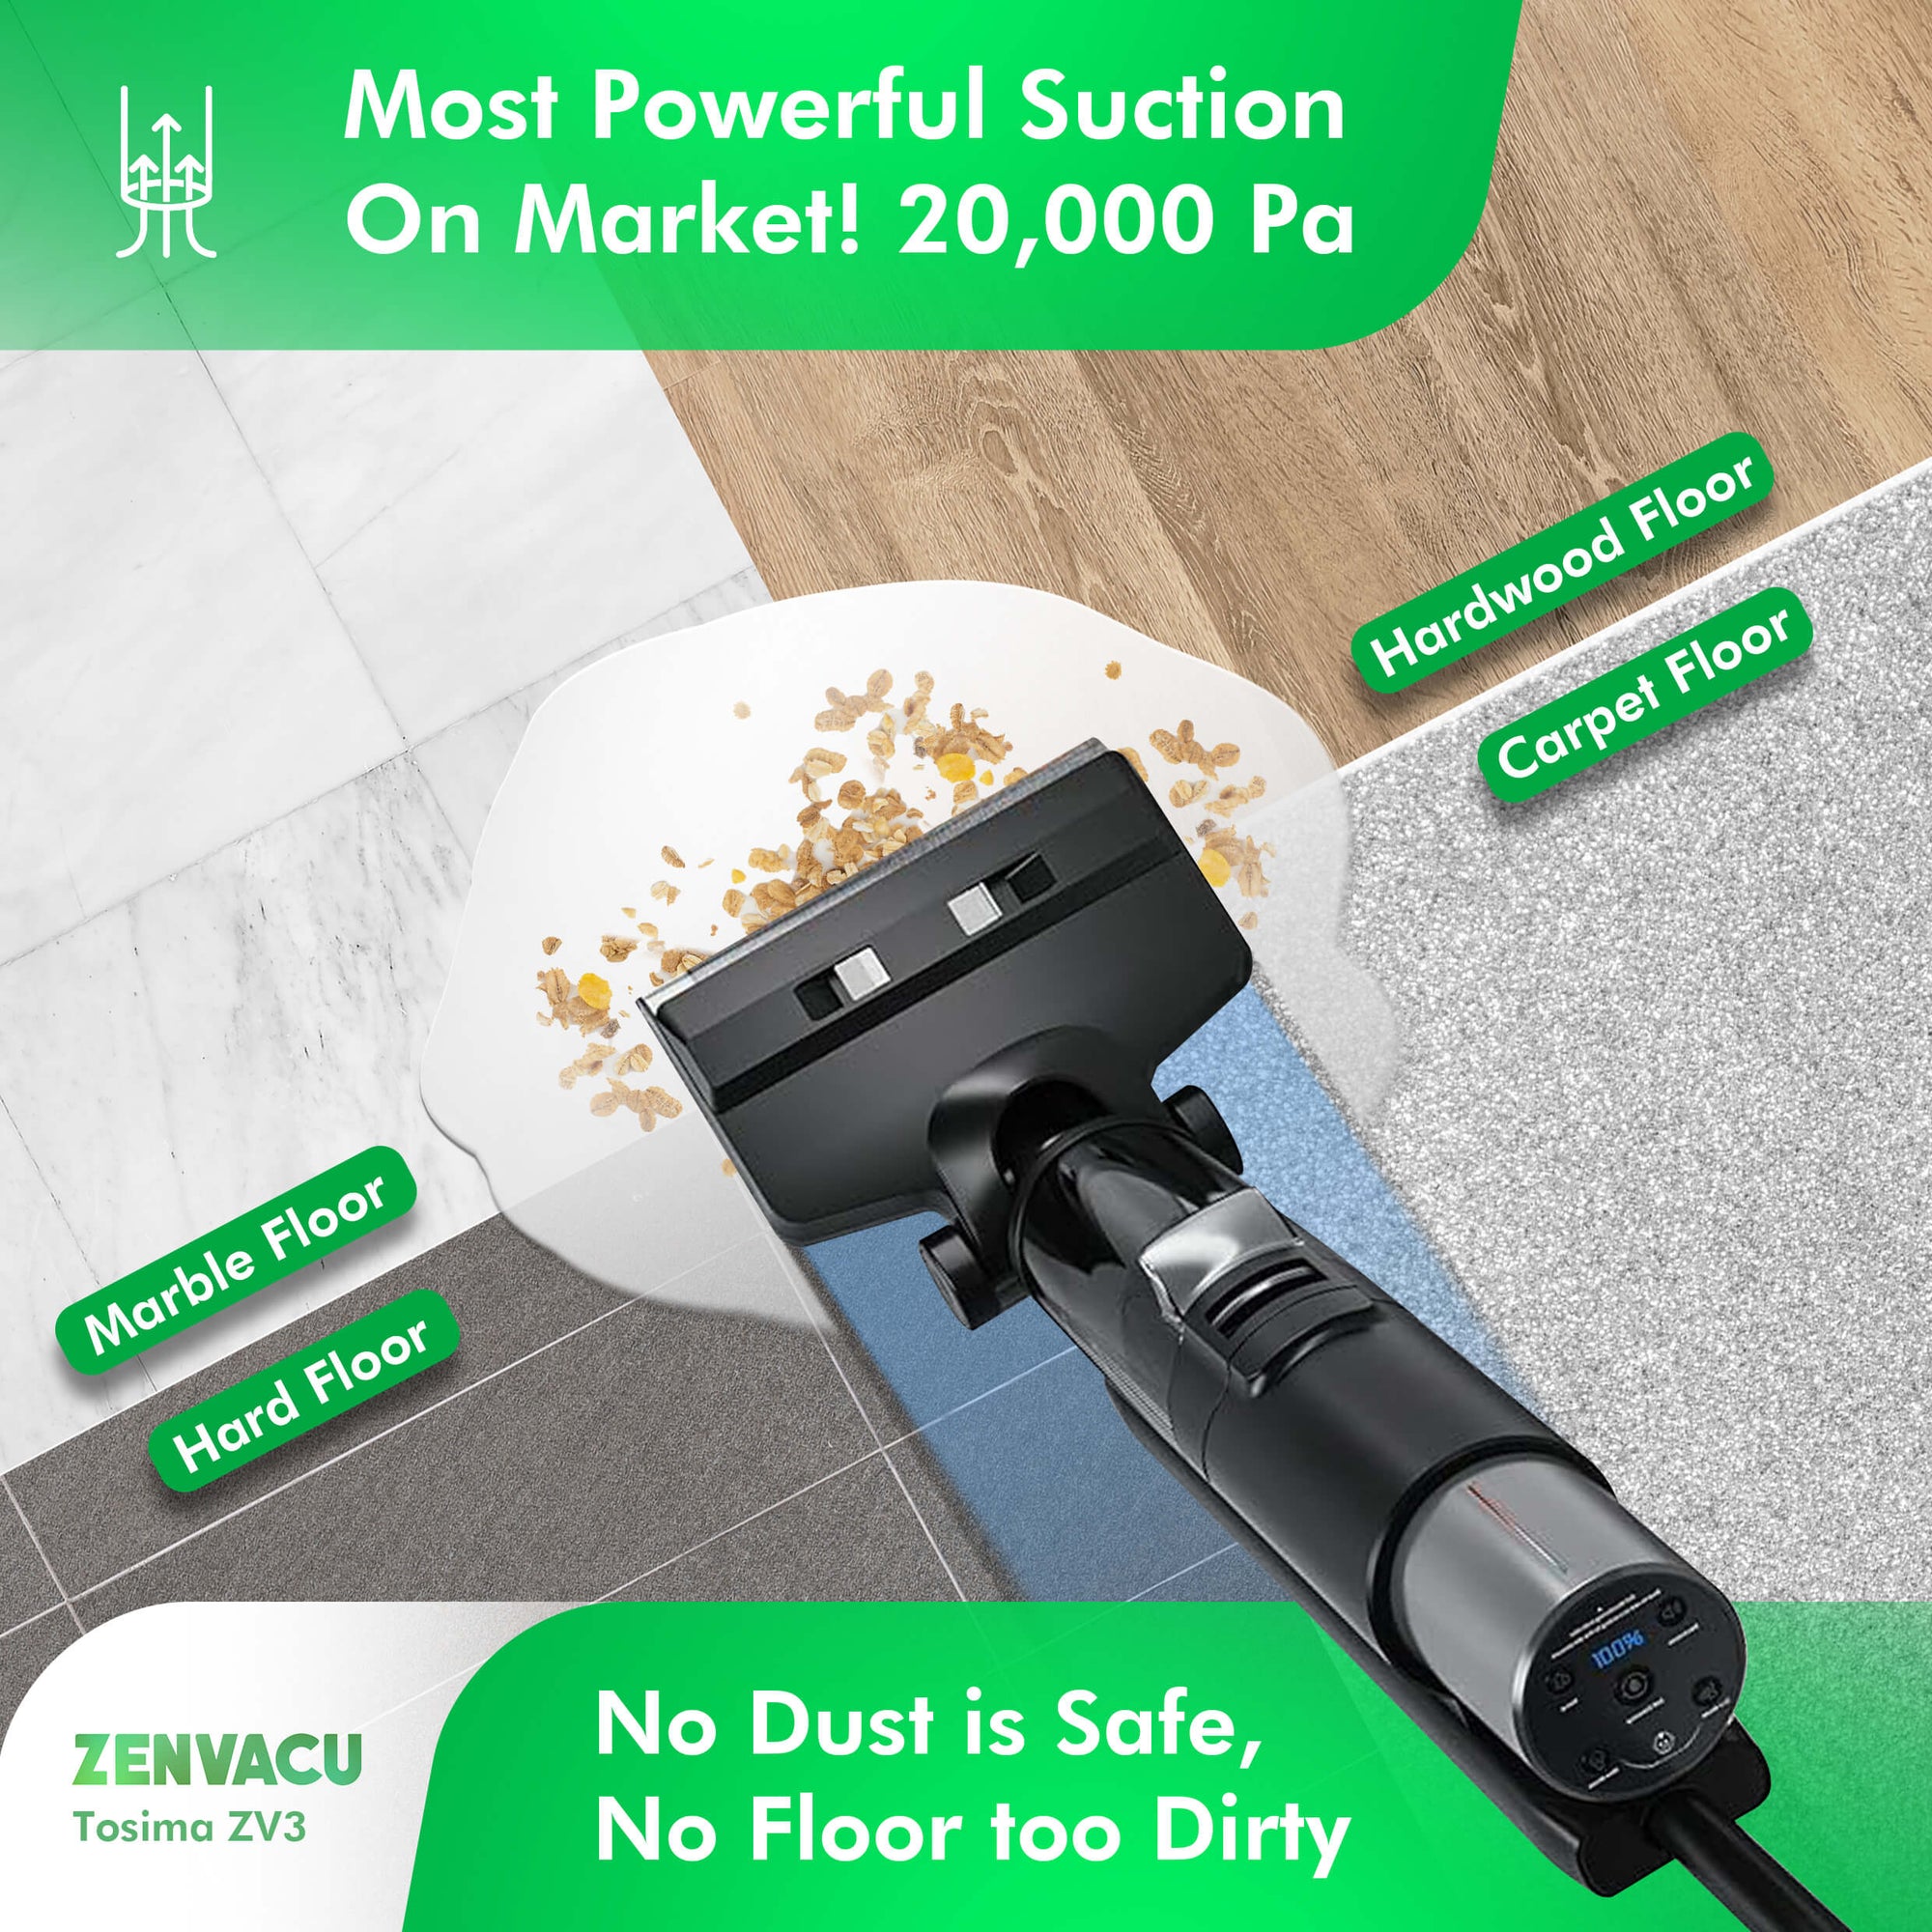 Powerful suction and effortless operation